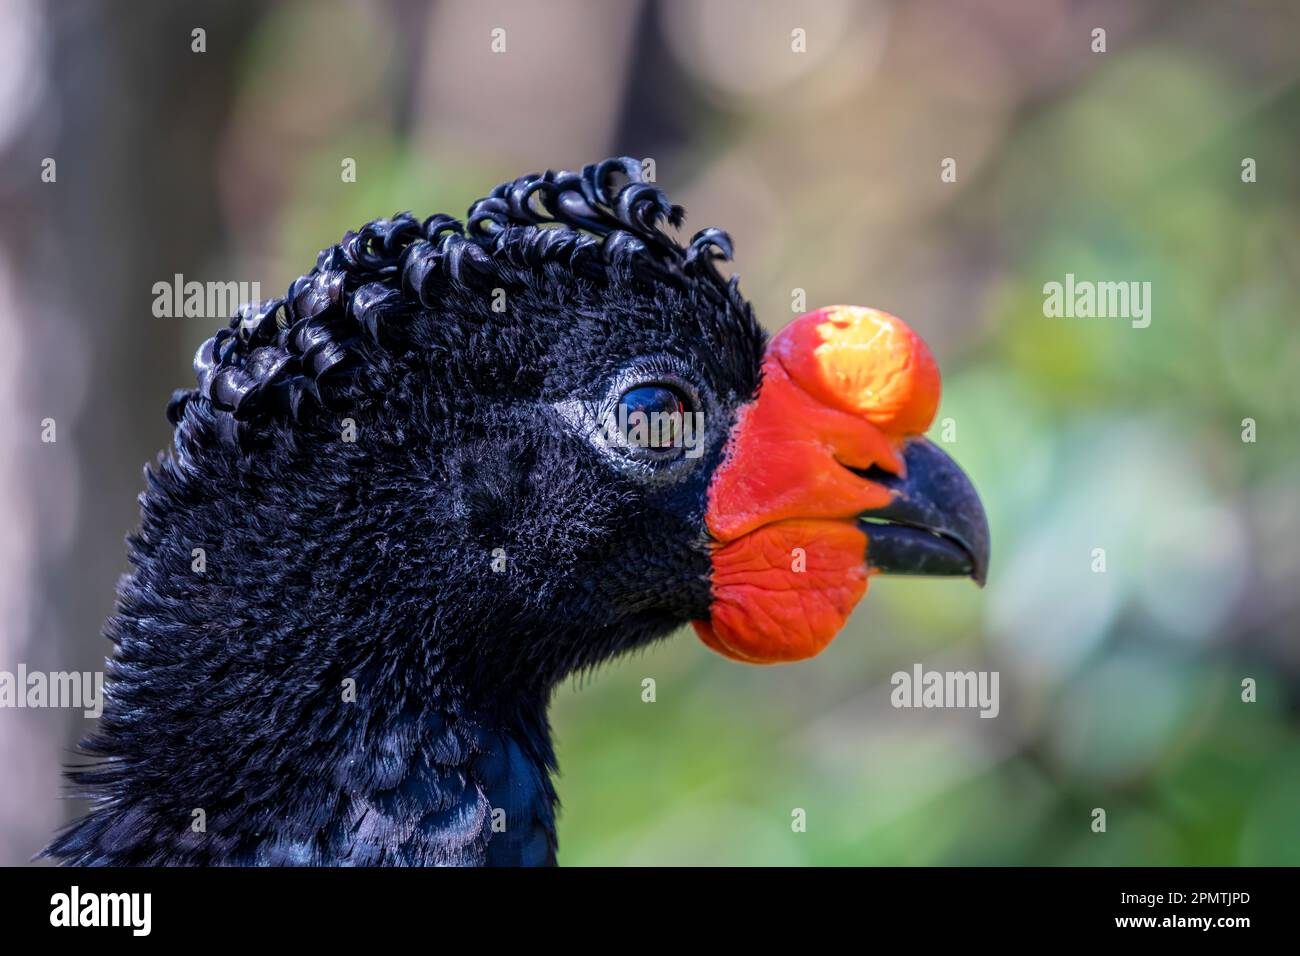 The wattled curassow (Crax globulosa) is a threatened member of the family Cracidae, the curassows, guans, and chachalacas. Stock Photo